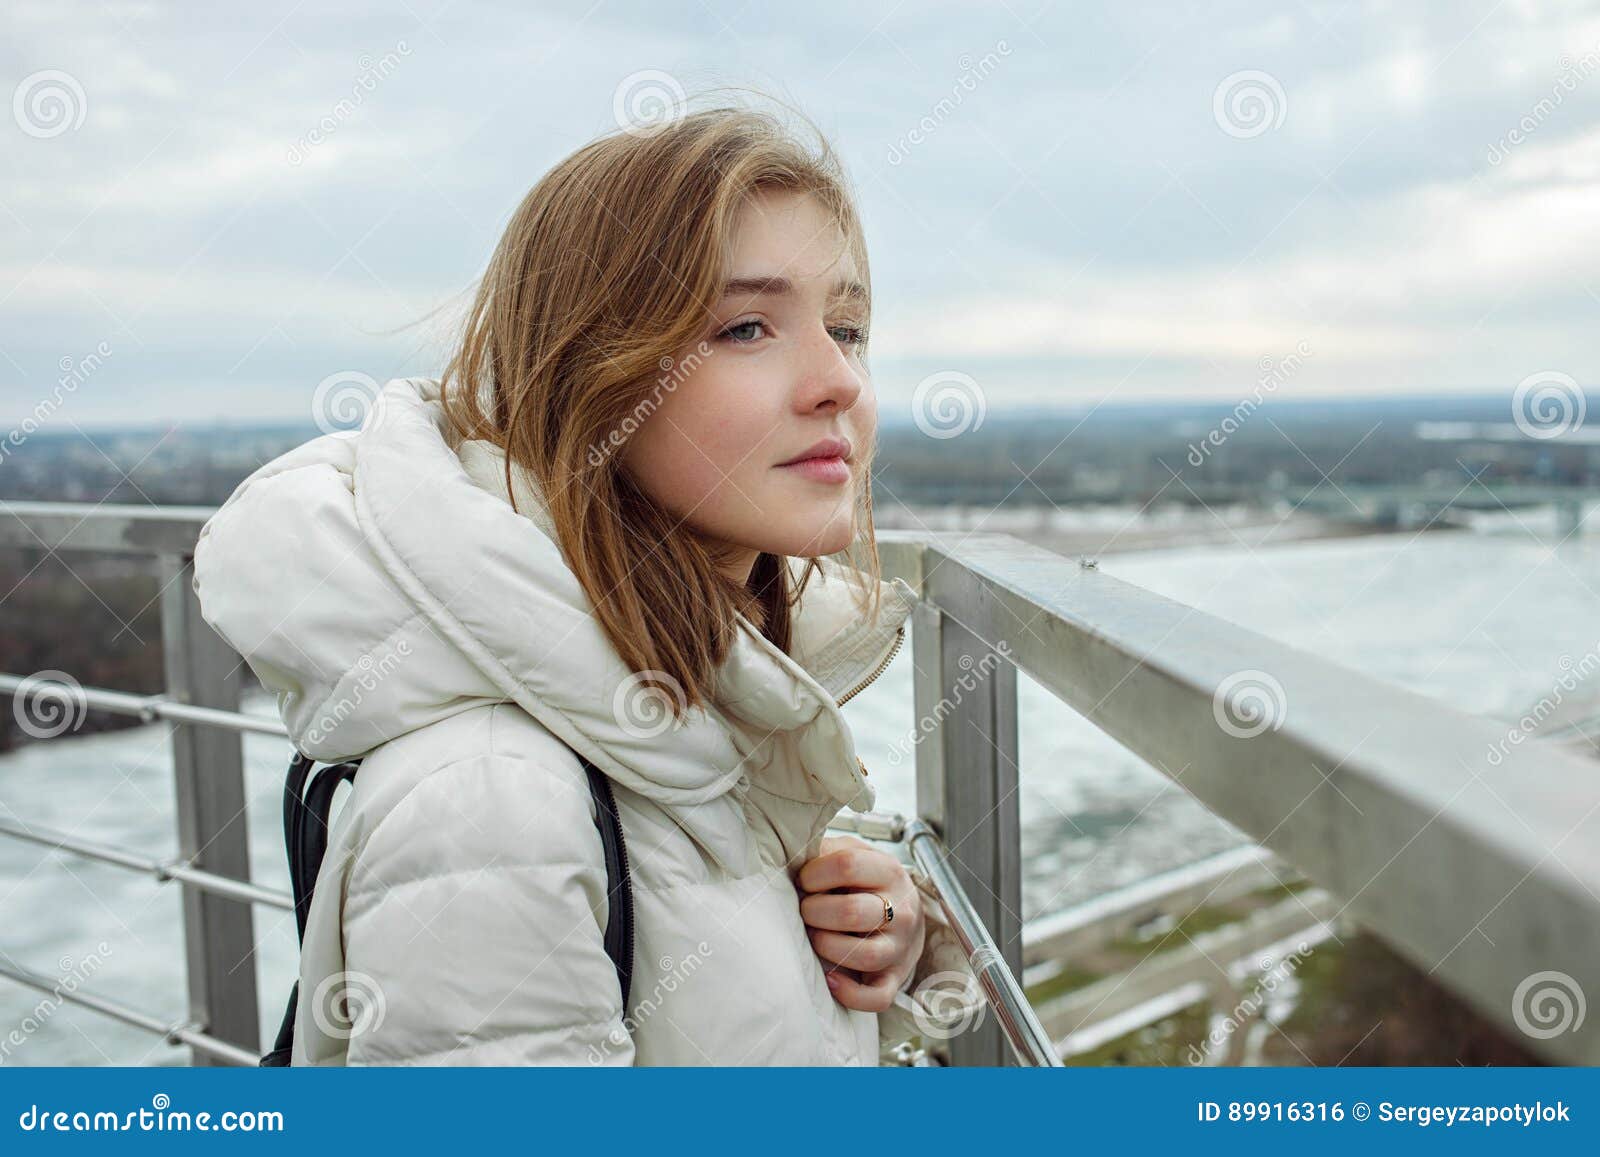 Young Adorable Blonde Teen Girl Having Fun on the Observation Deck with ...